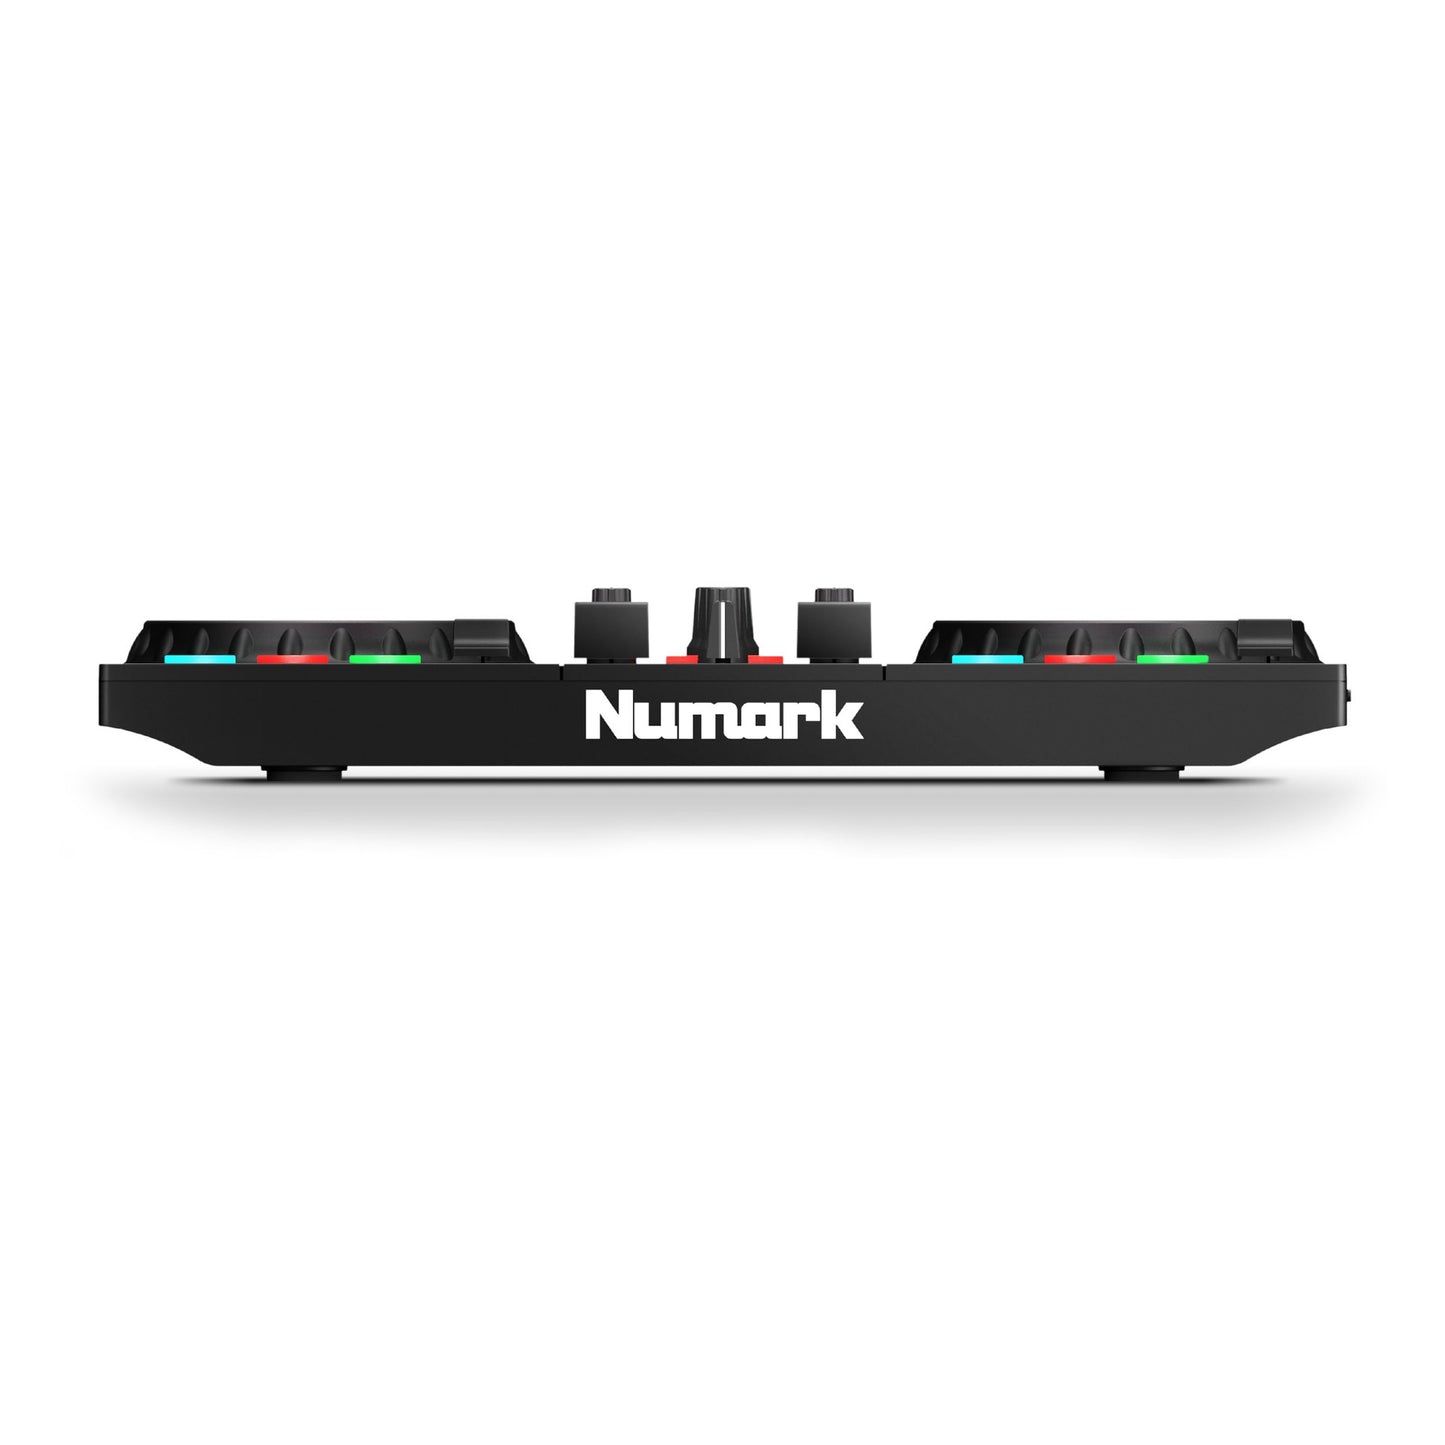 Numark Party Mix II DJ Controller with Built in Light Show